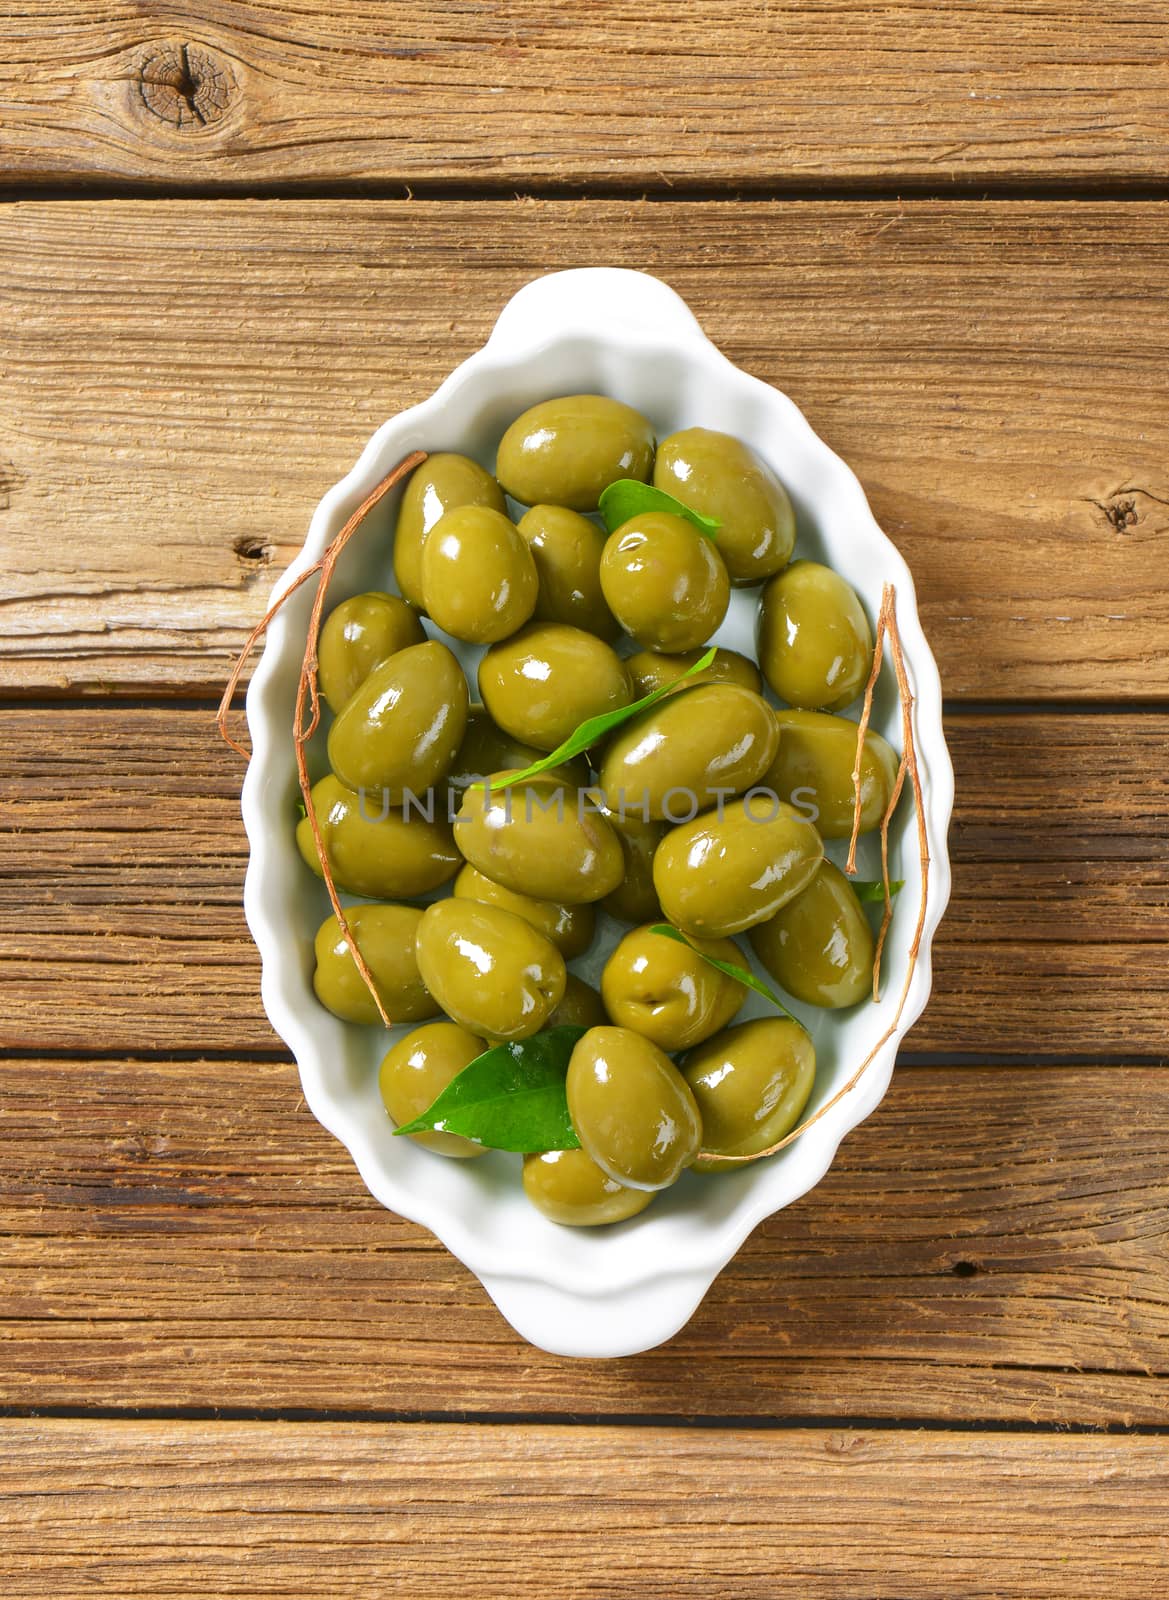 bowl of green olives on wooden background